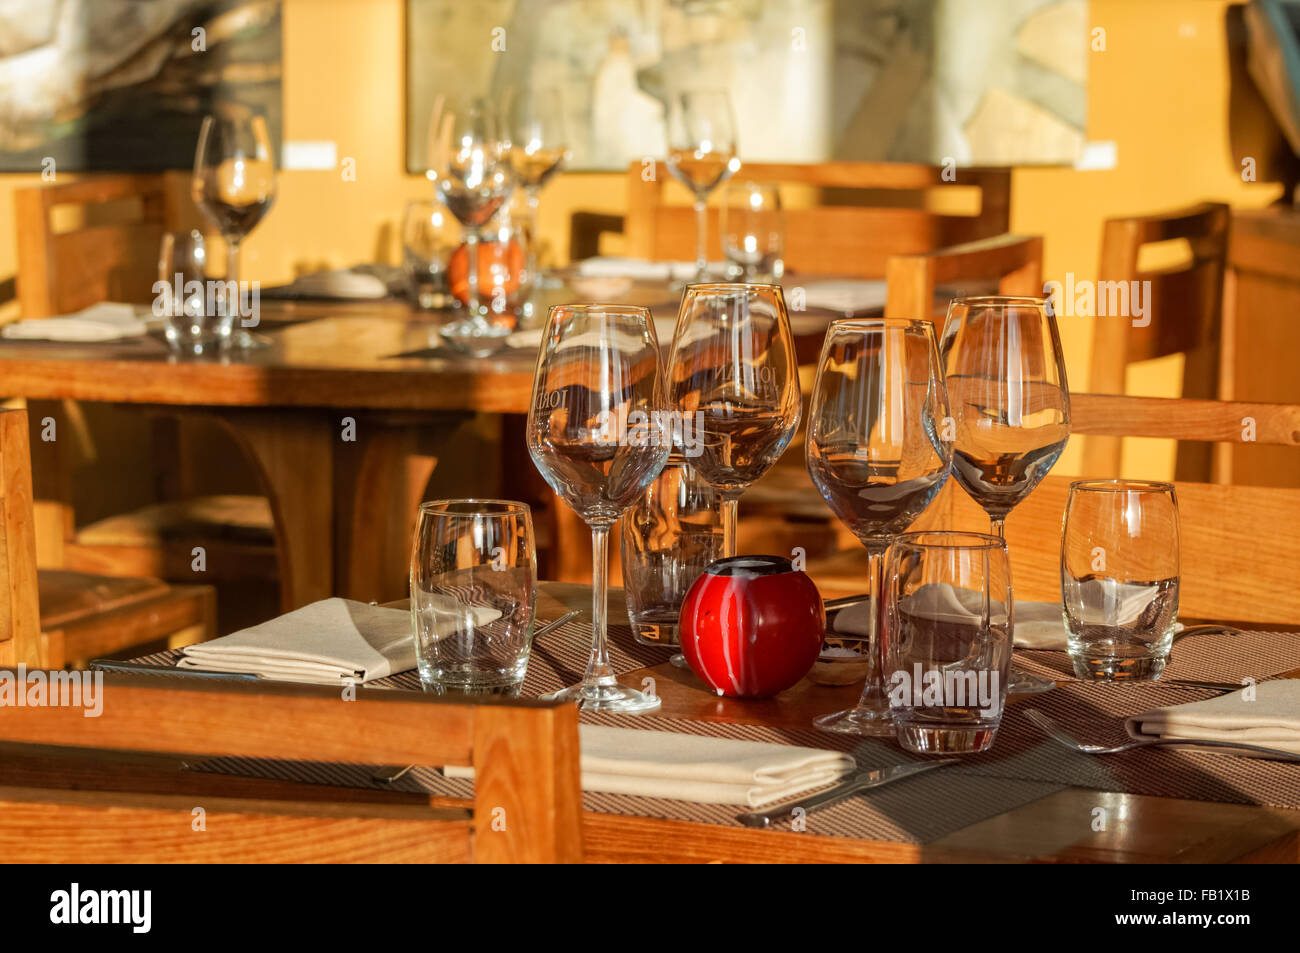 Interior of a restaurant with empty glasses on tables, London England United Kingdom UK Stock Photo